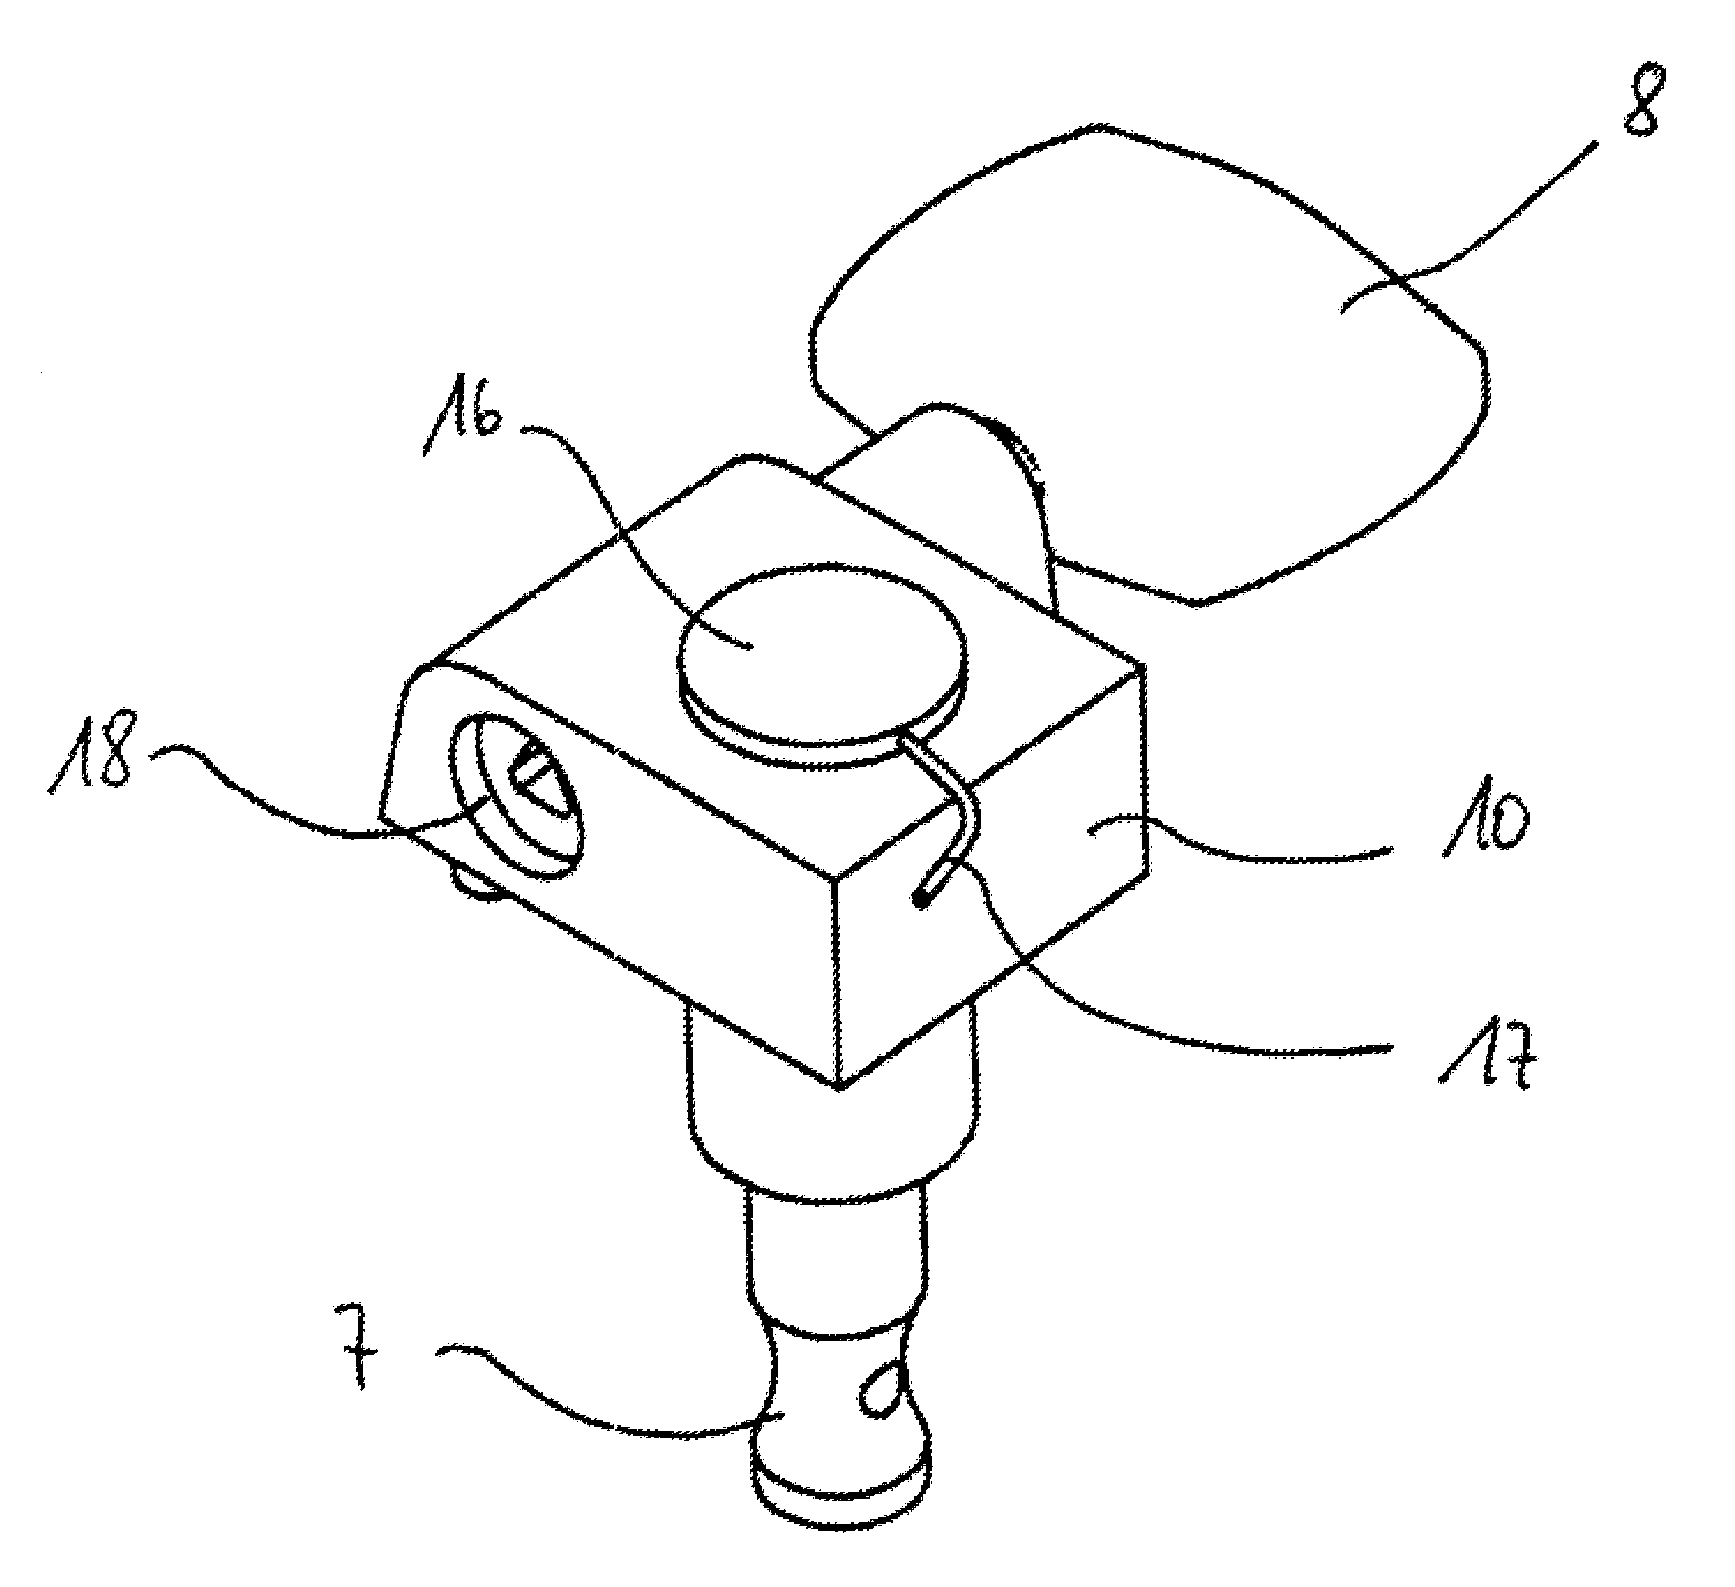 Device for Automatically Tuning a String of a Stringed Instrument